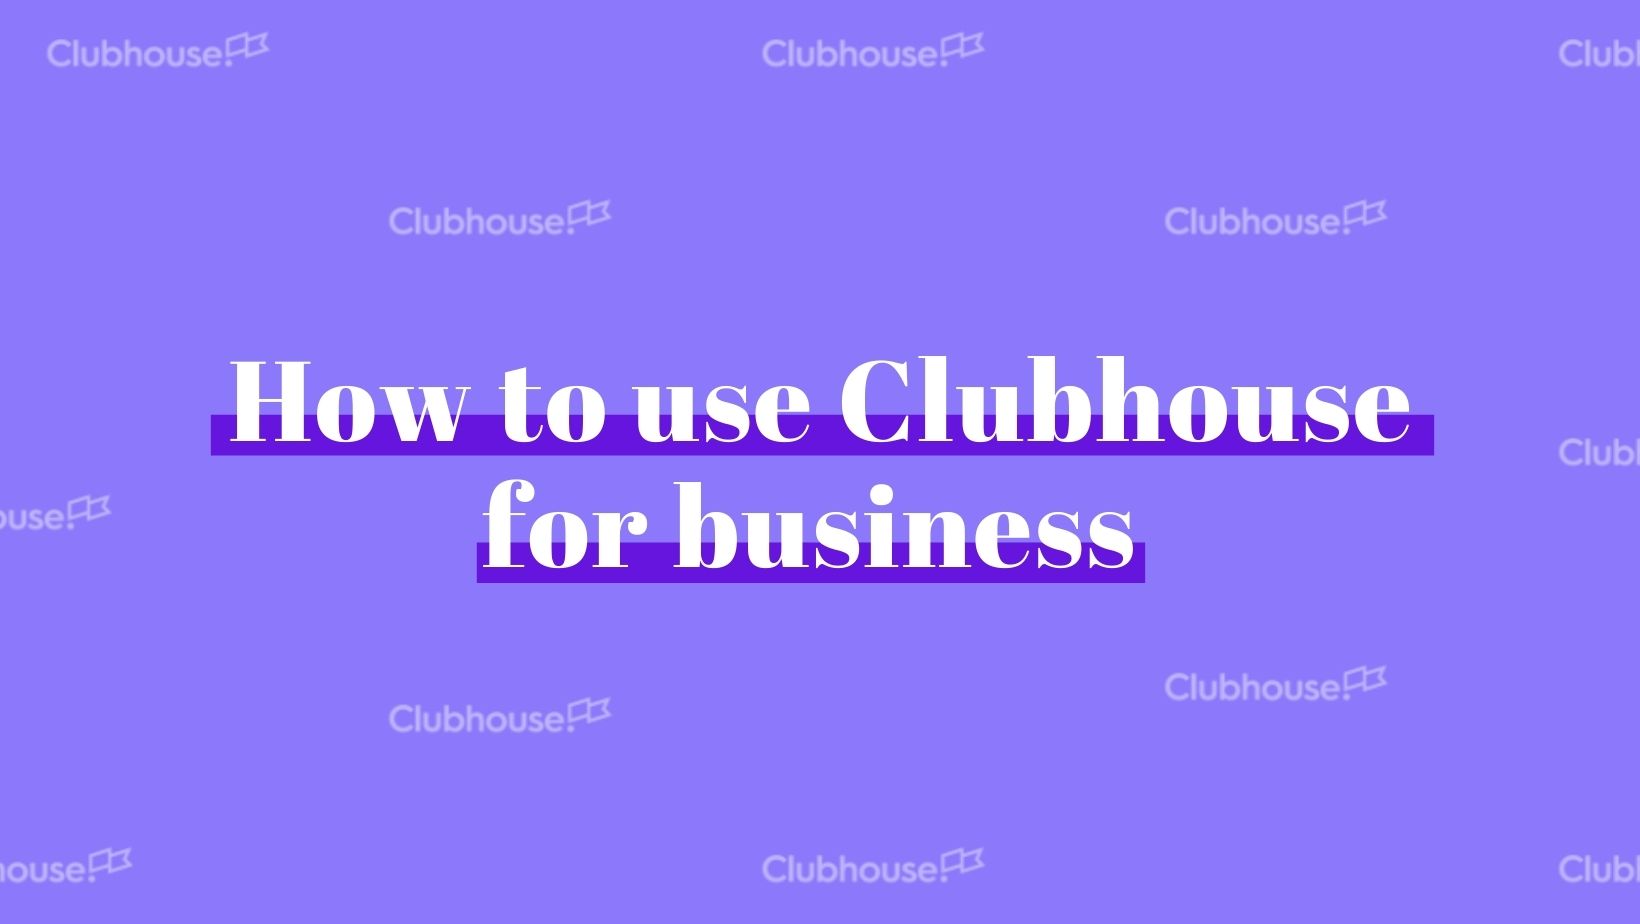 How to use Clubhouse for business 2021 - Viva Brand Marketing